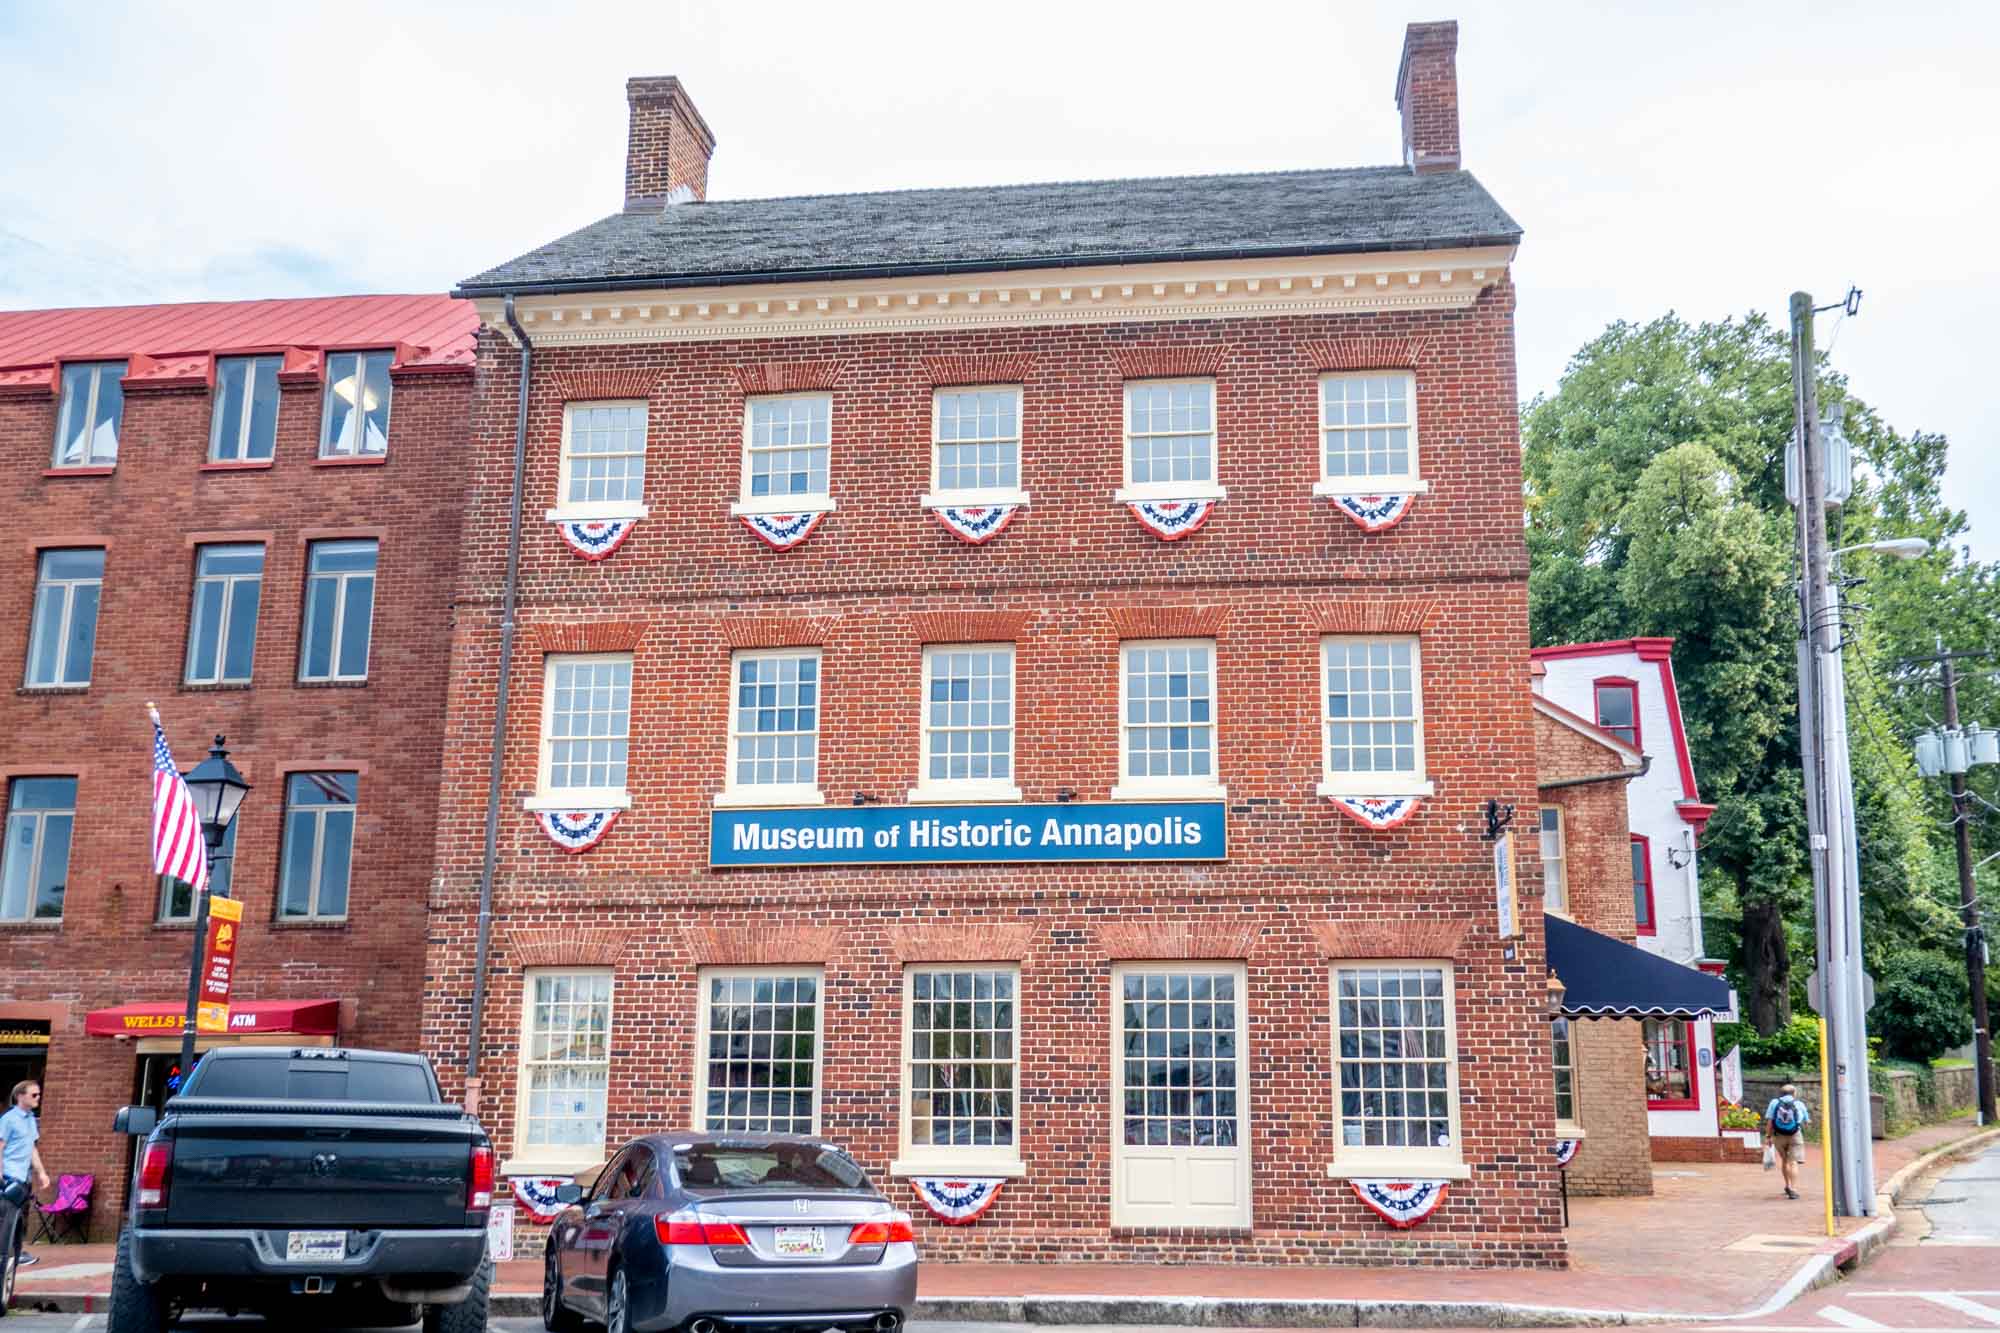 3-story brick building with rows of windows and a sign for 